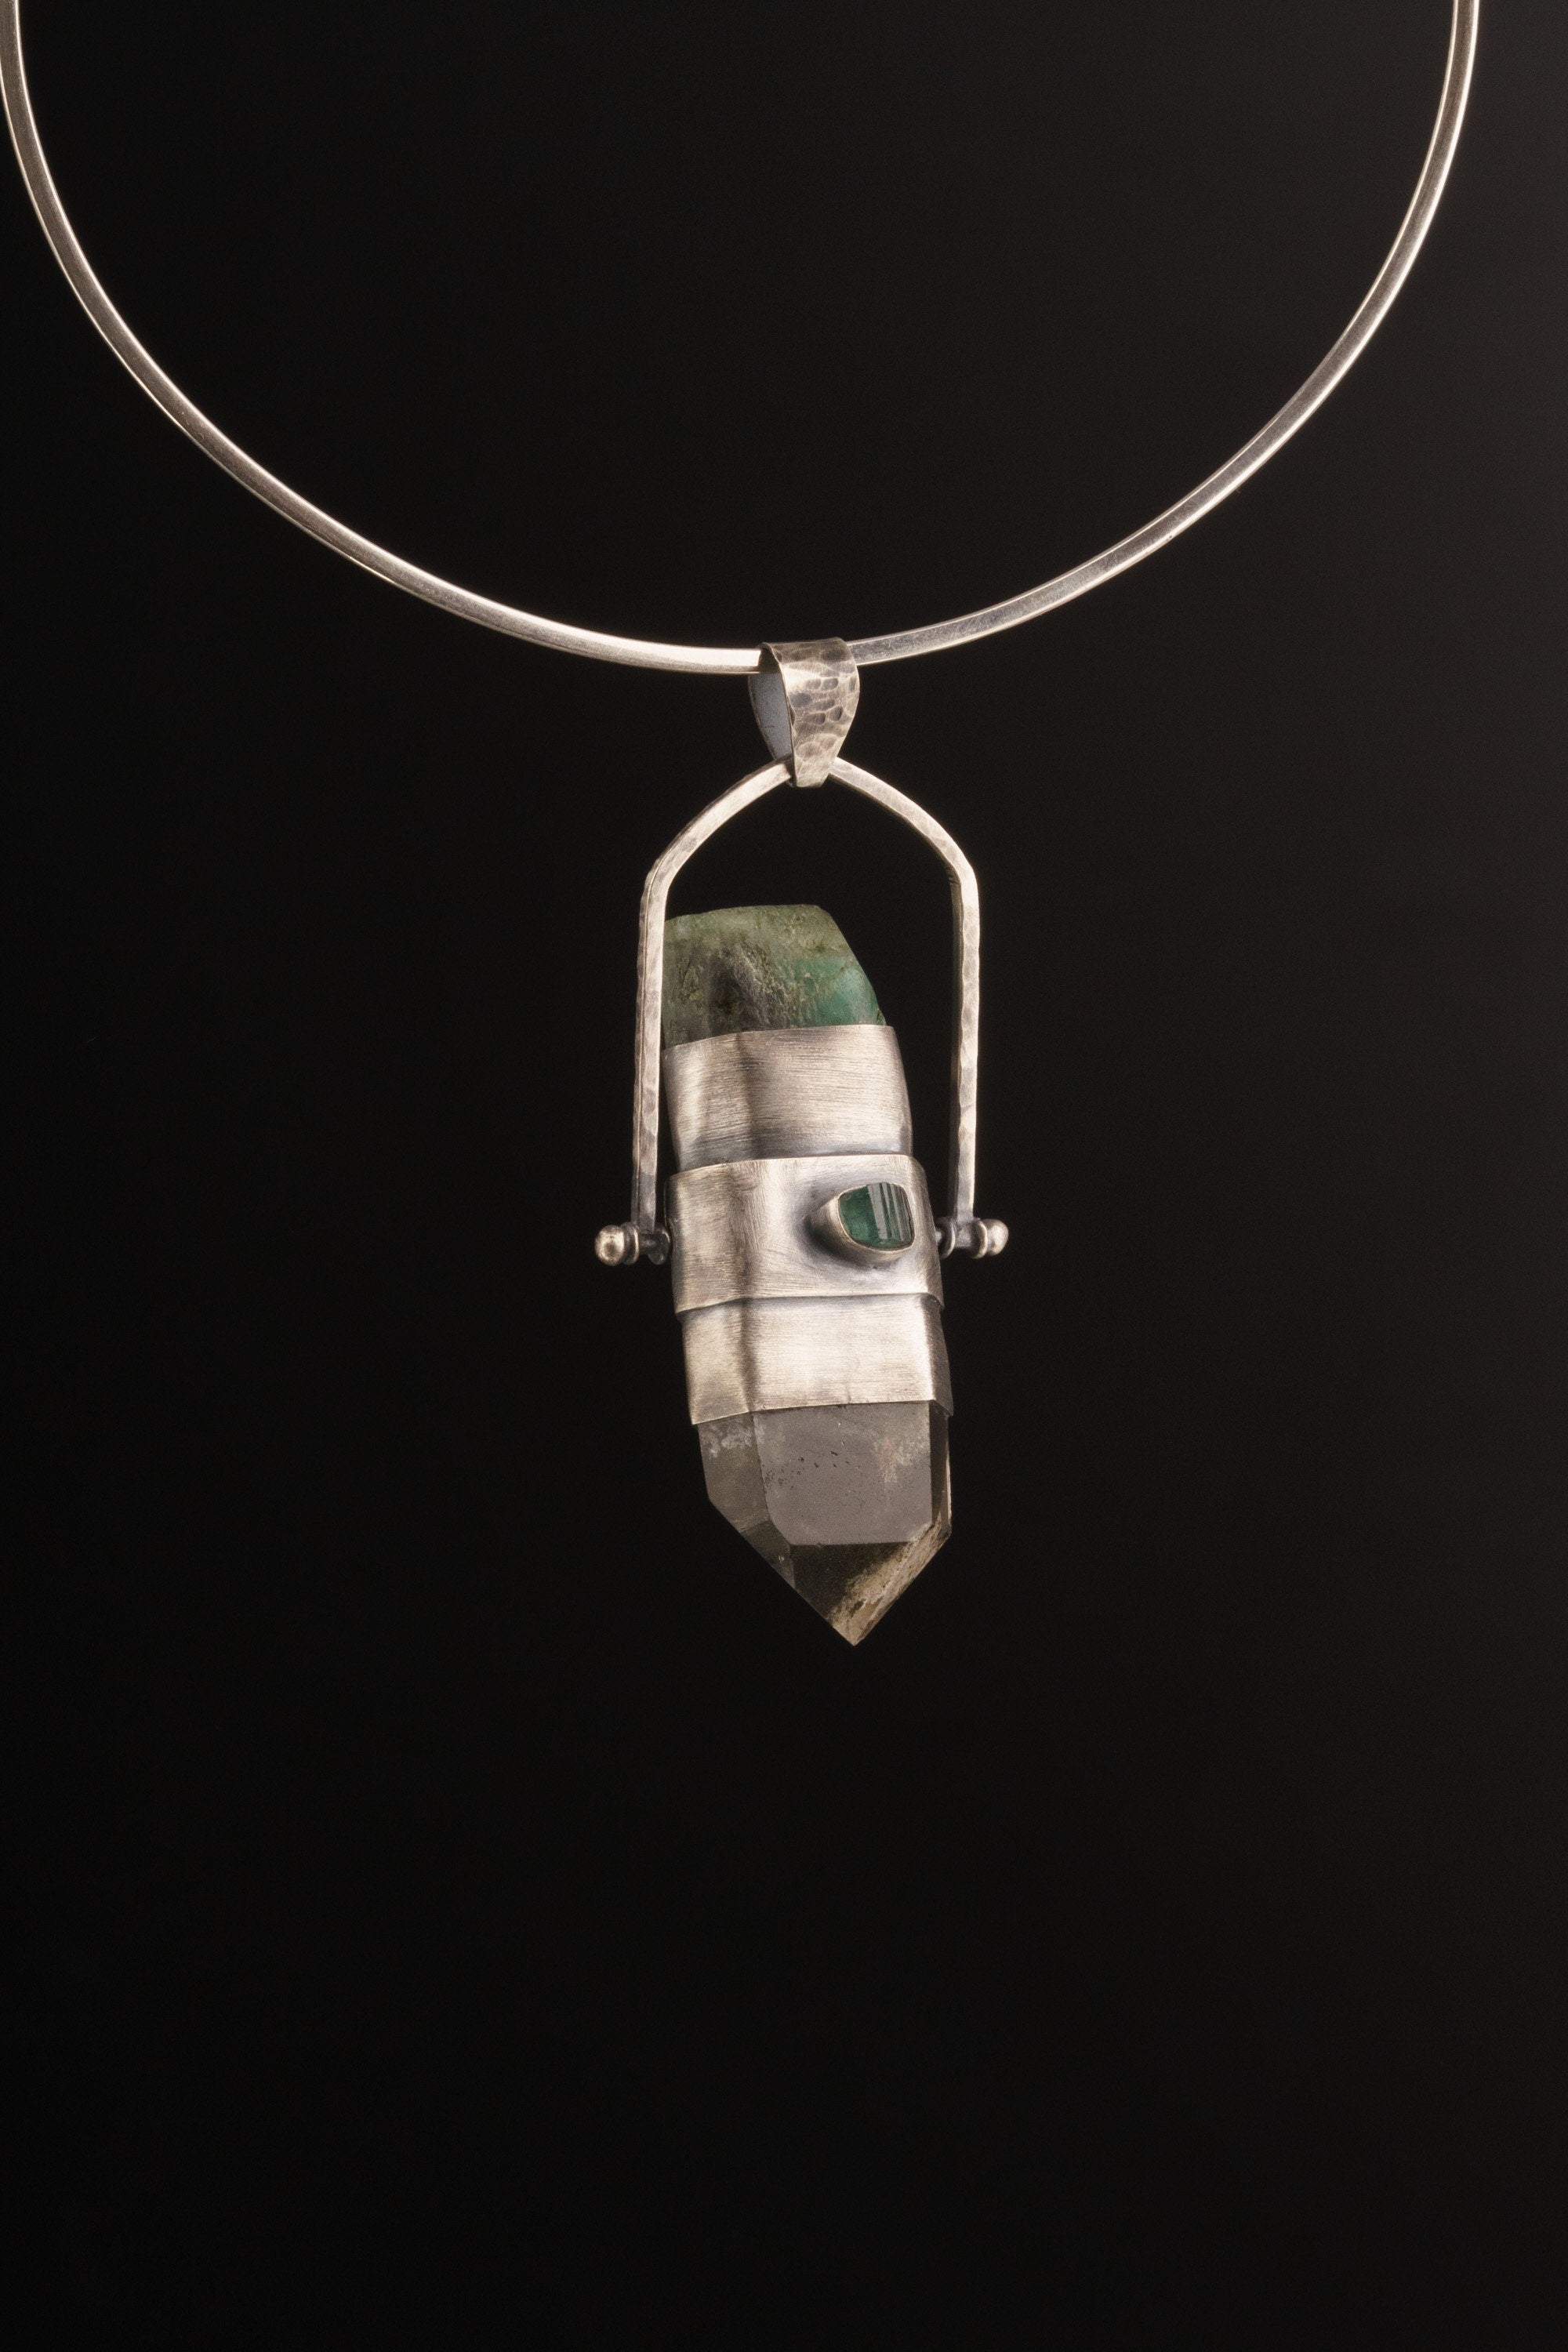 Celestial Spinner: Australian Emerald, Clear Chlorite Inclusion Quartz, Ethiopian Opal and Blue Tourmaline - Large Spinning Crystal Pendant